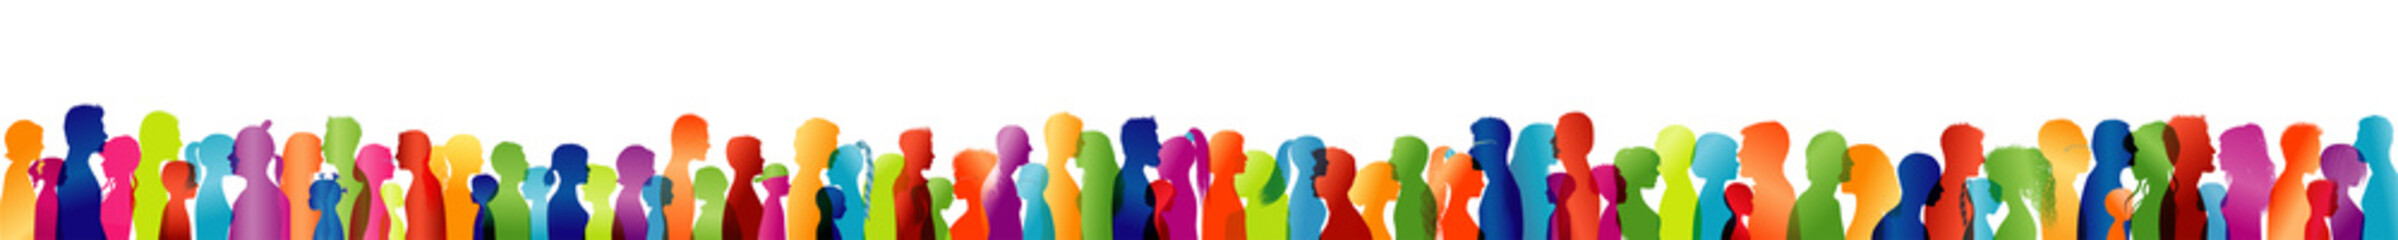 Large group or team of people silhouette colored profile. Friendship concept. Community. People talking. Face. Head. Multiple exposure